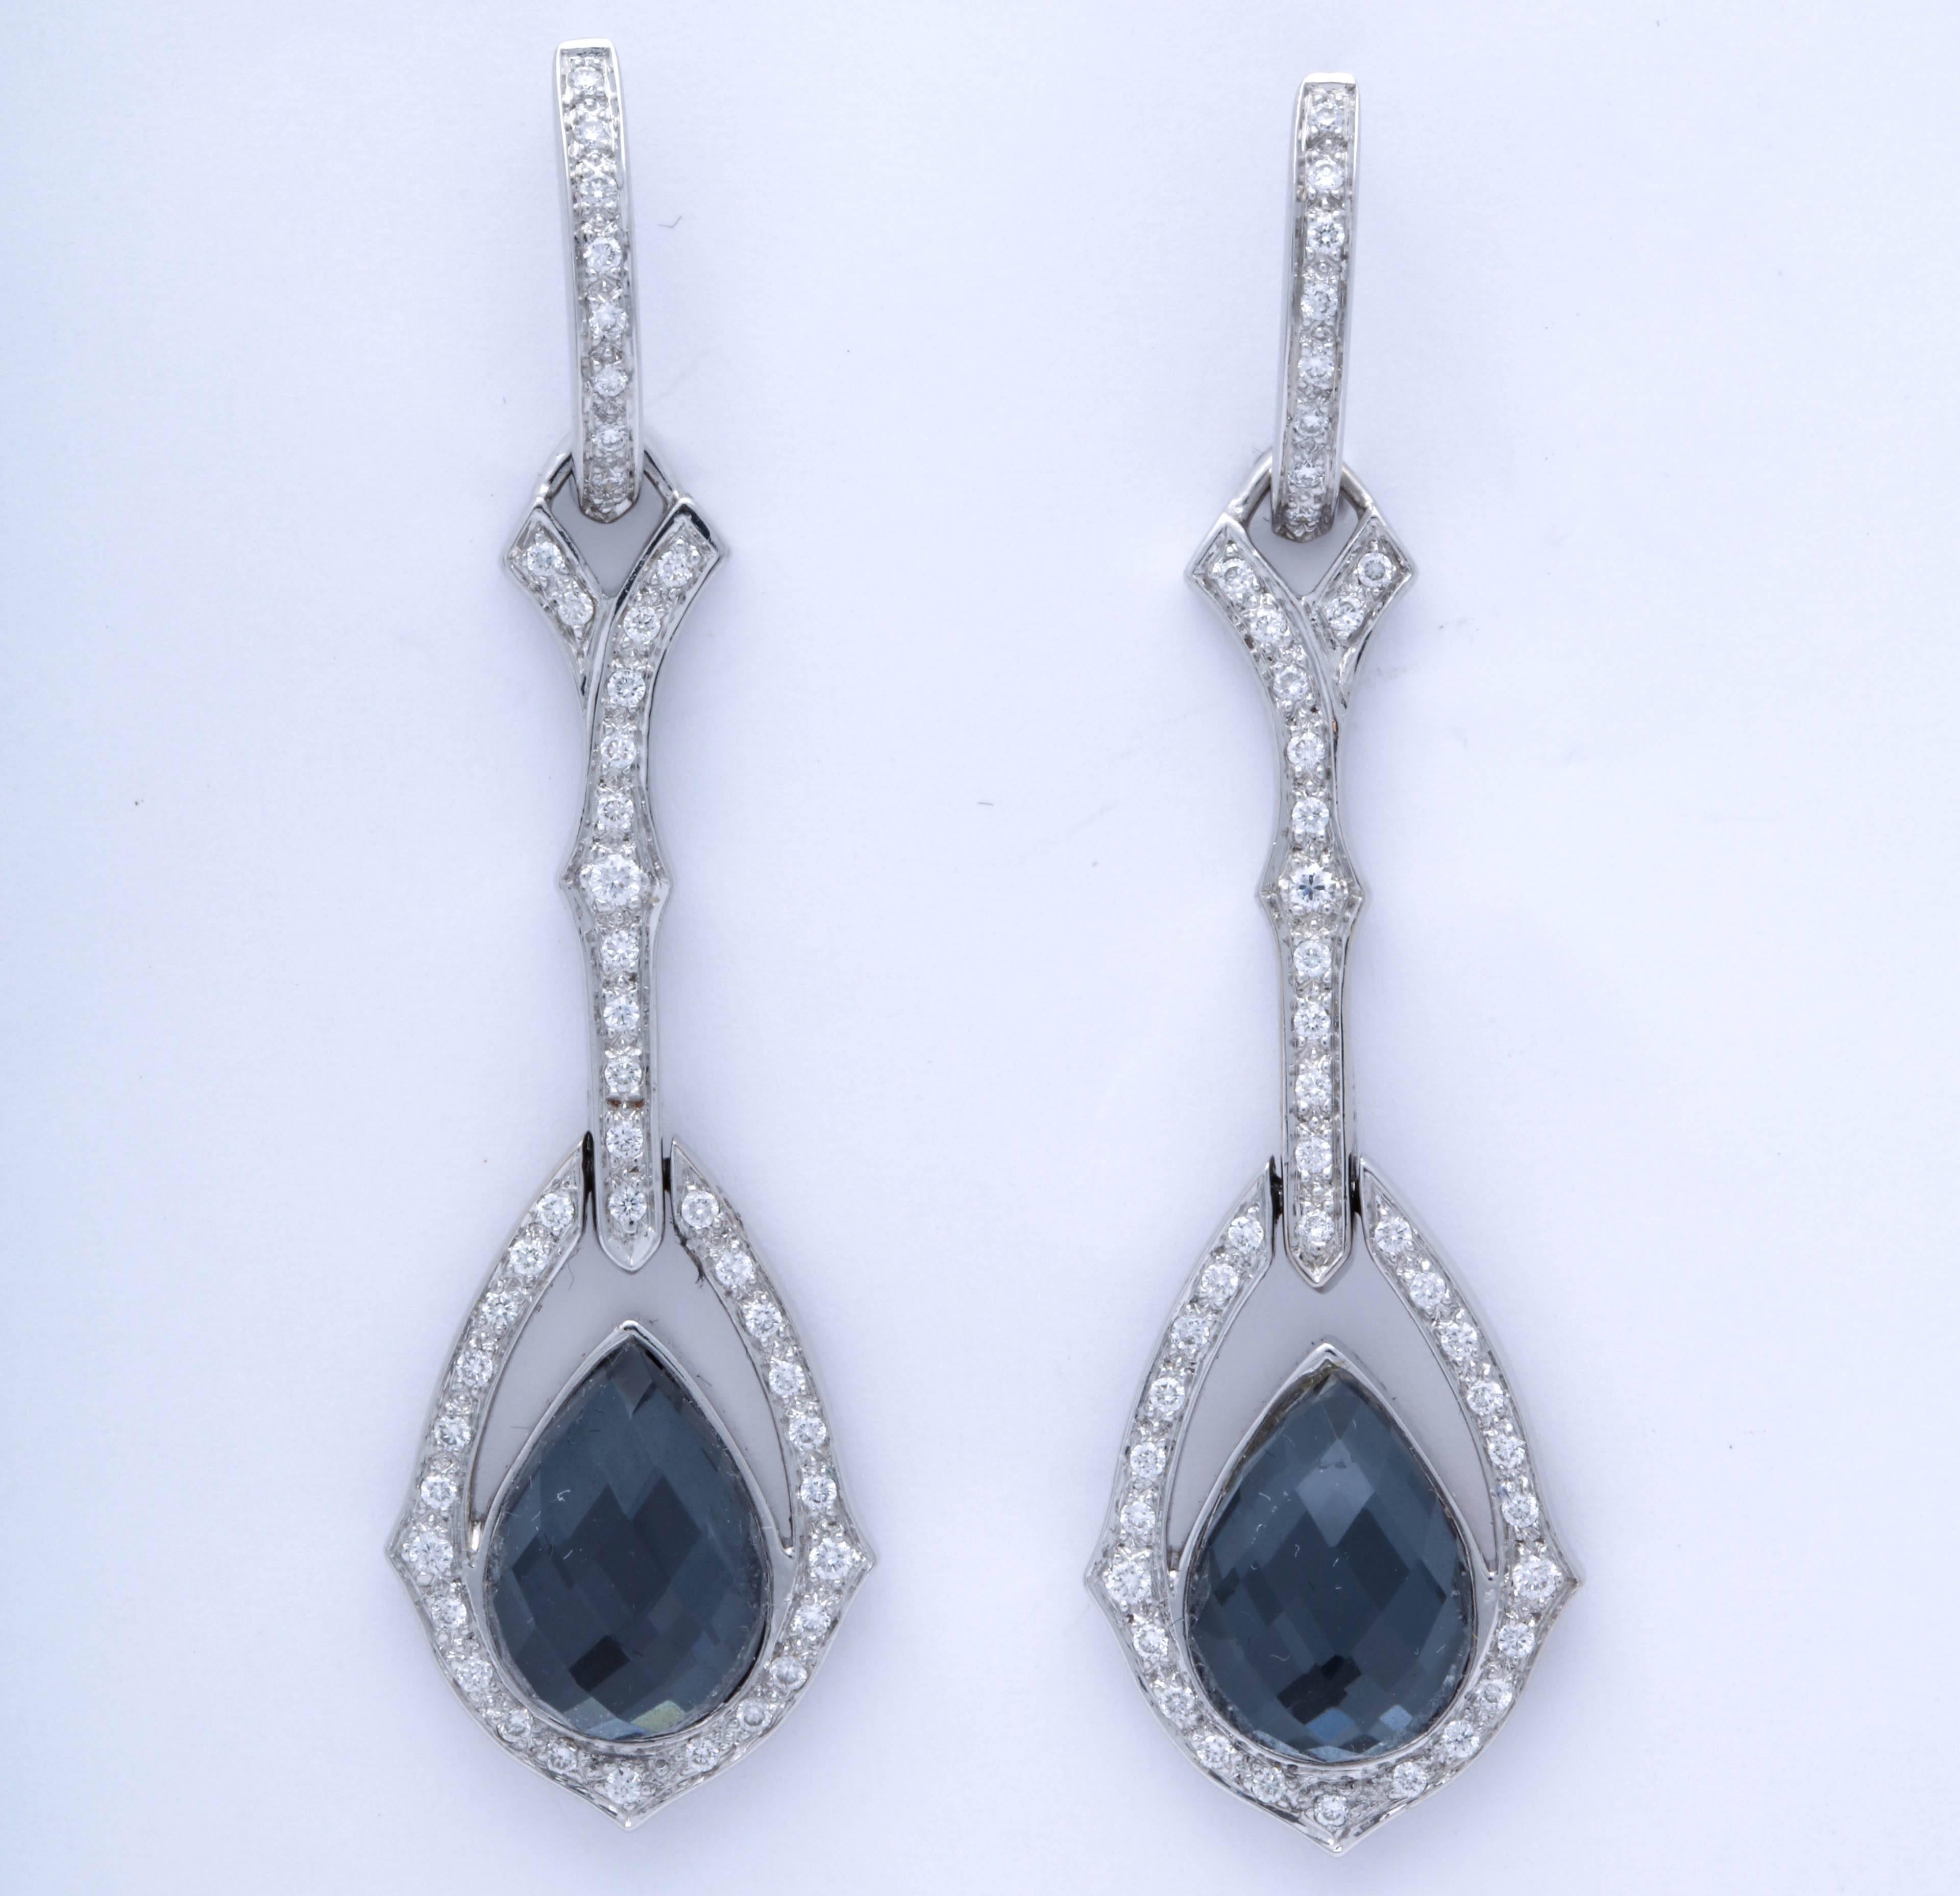 From the Romantic Crystal Haze Collection by English Jeweler, Stephen Webster - a Pair of Convertible Length drop Earrings set in 18kt White Gold and set with a Faceted teardrop shaped crystal Haze Quartz Stone.
Earrings can be worn with Diamond